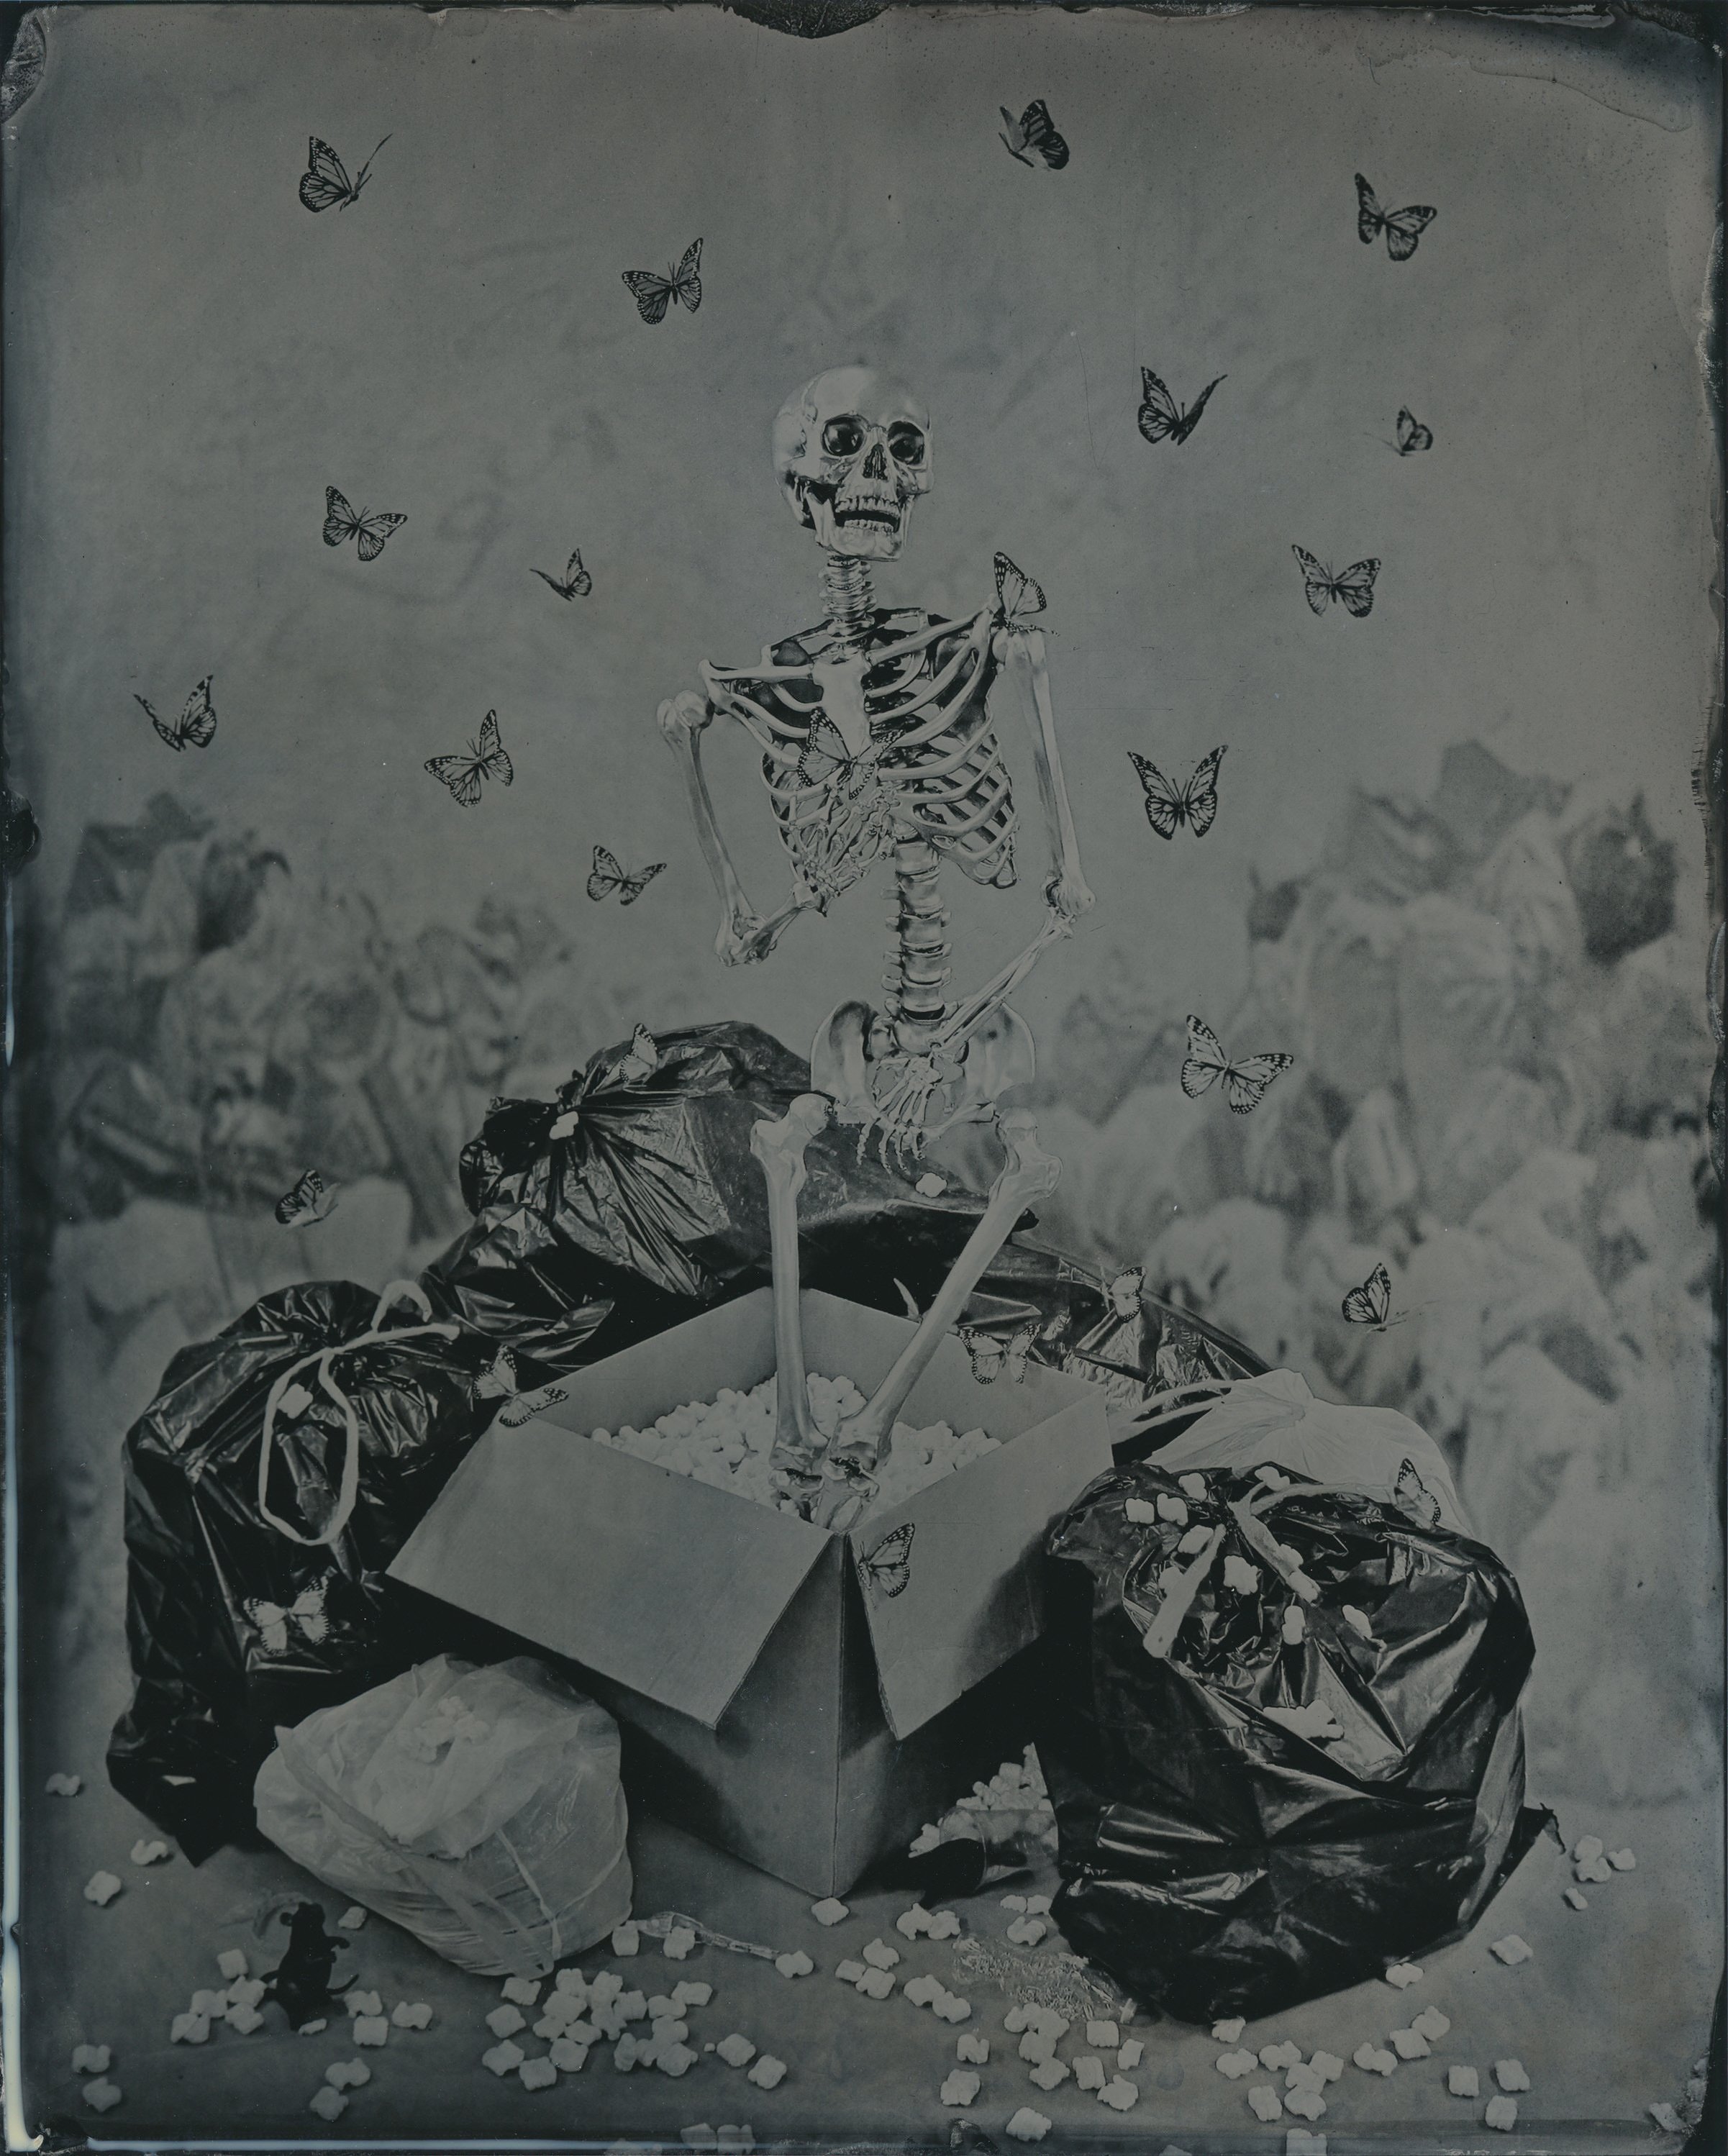   “The Birth of Psyche”   2022  Wet Plate Collodion  8x10 